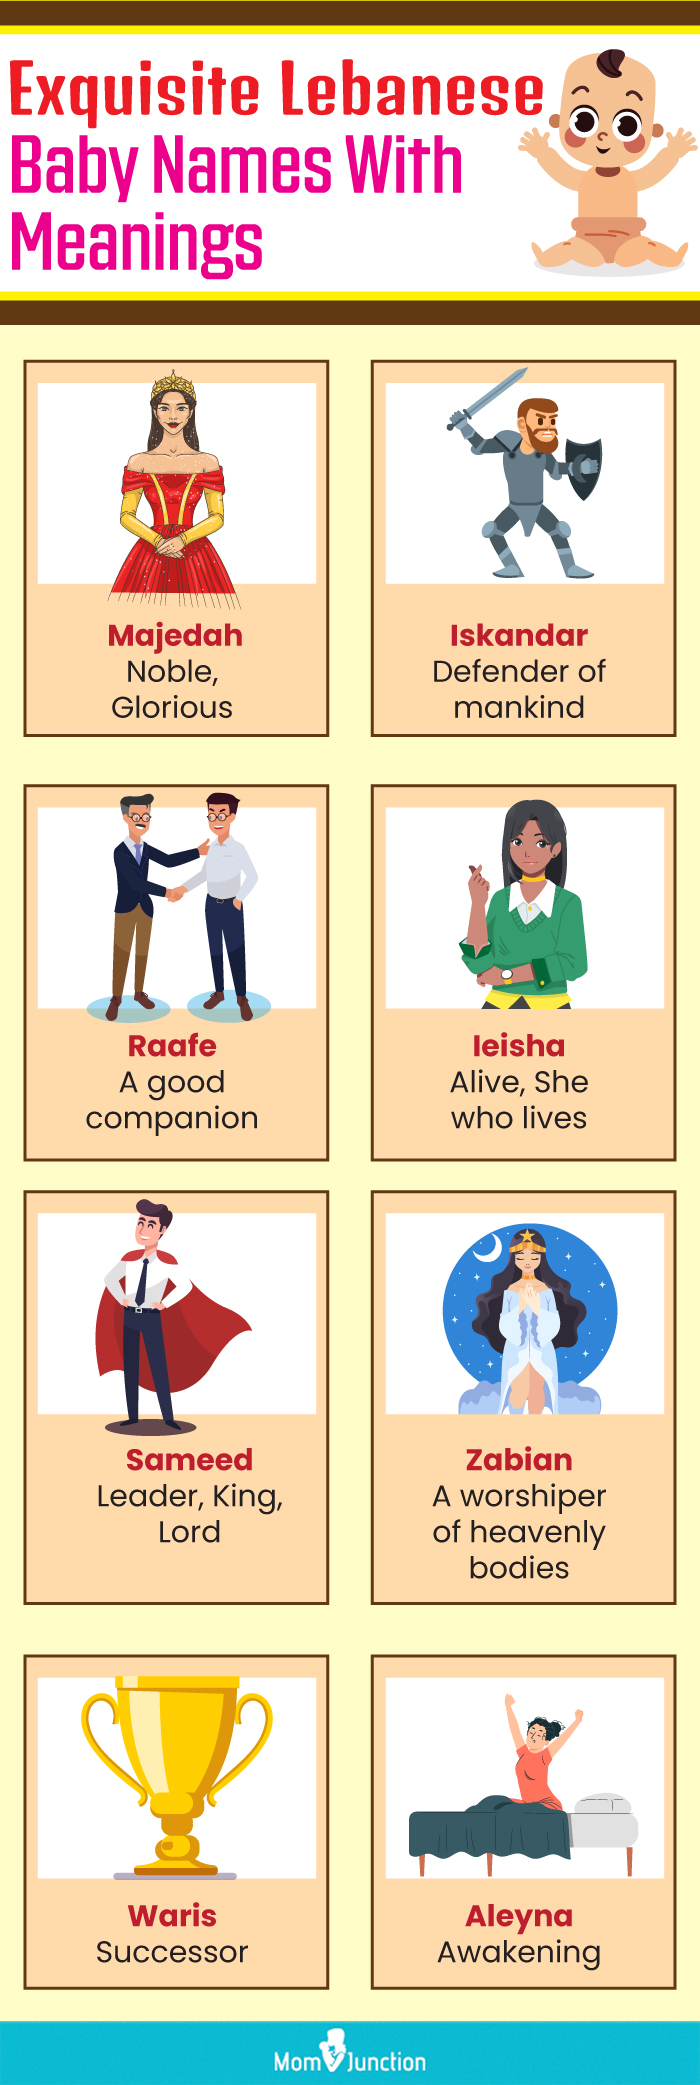 exquisite lebanese baby names with meanings (infographic)